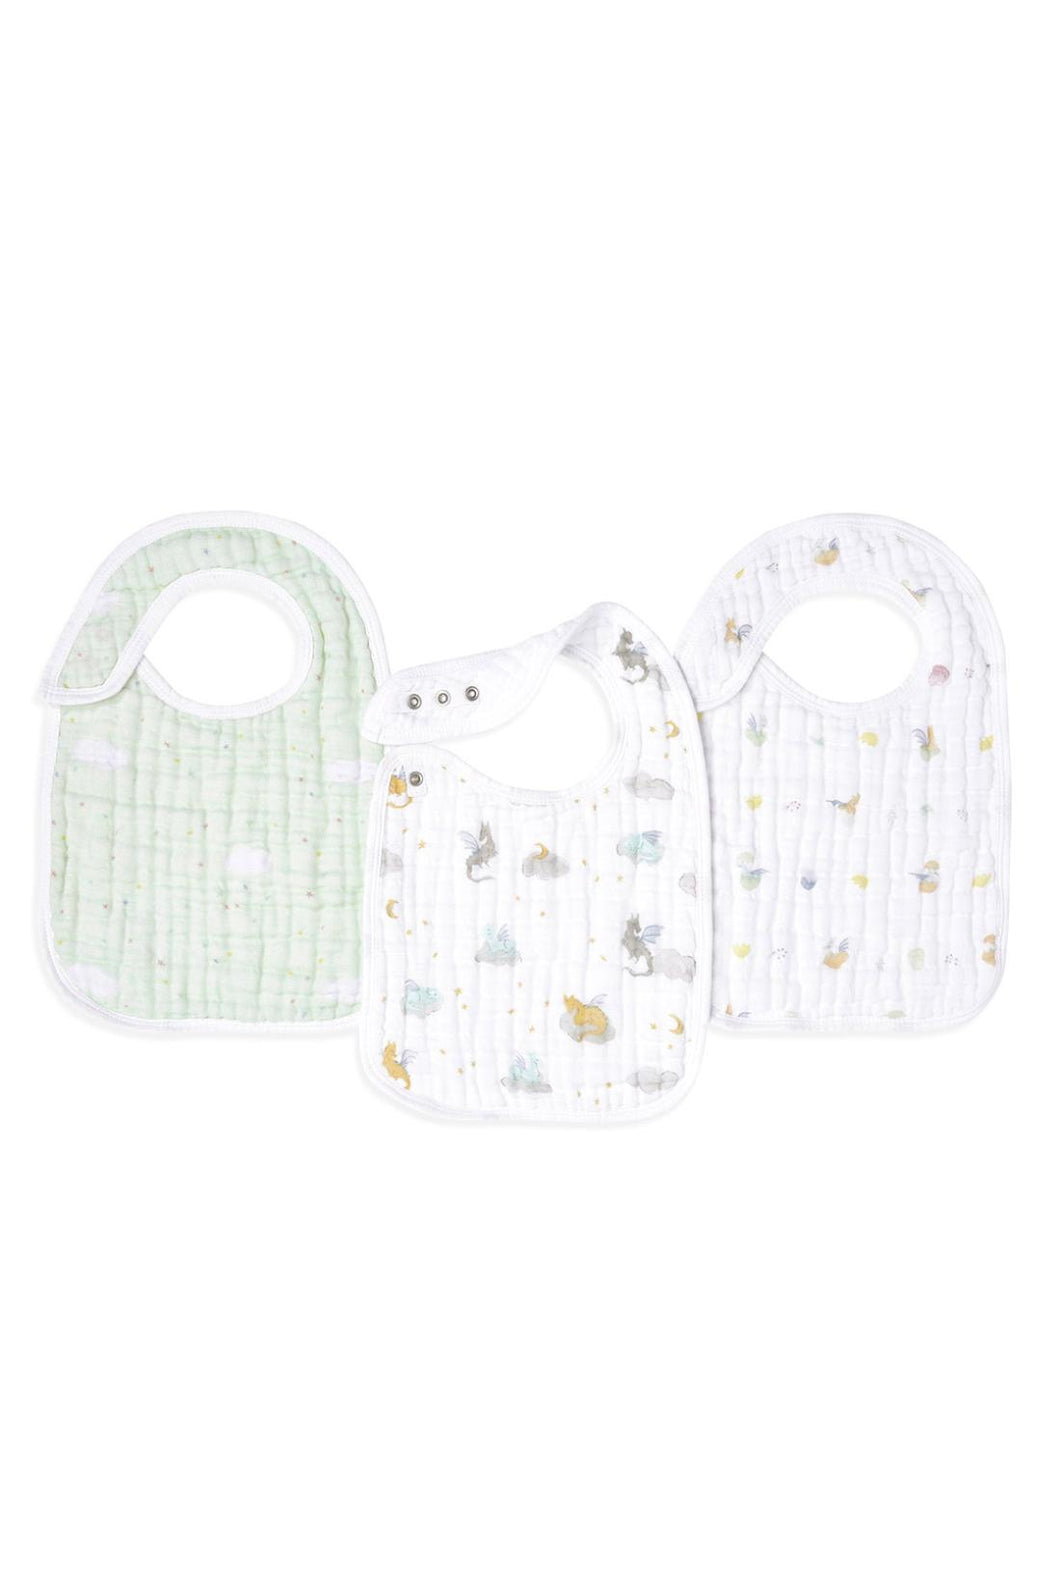 Aden + Anais Classic Snap Bib 3 pack - Year Of the Dragon